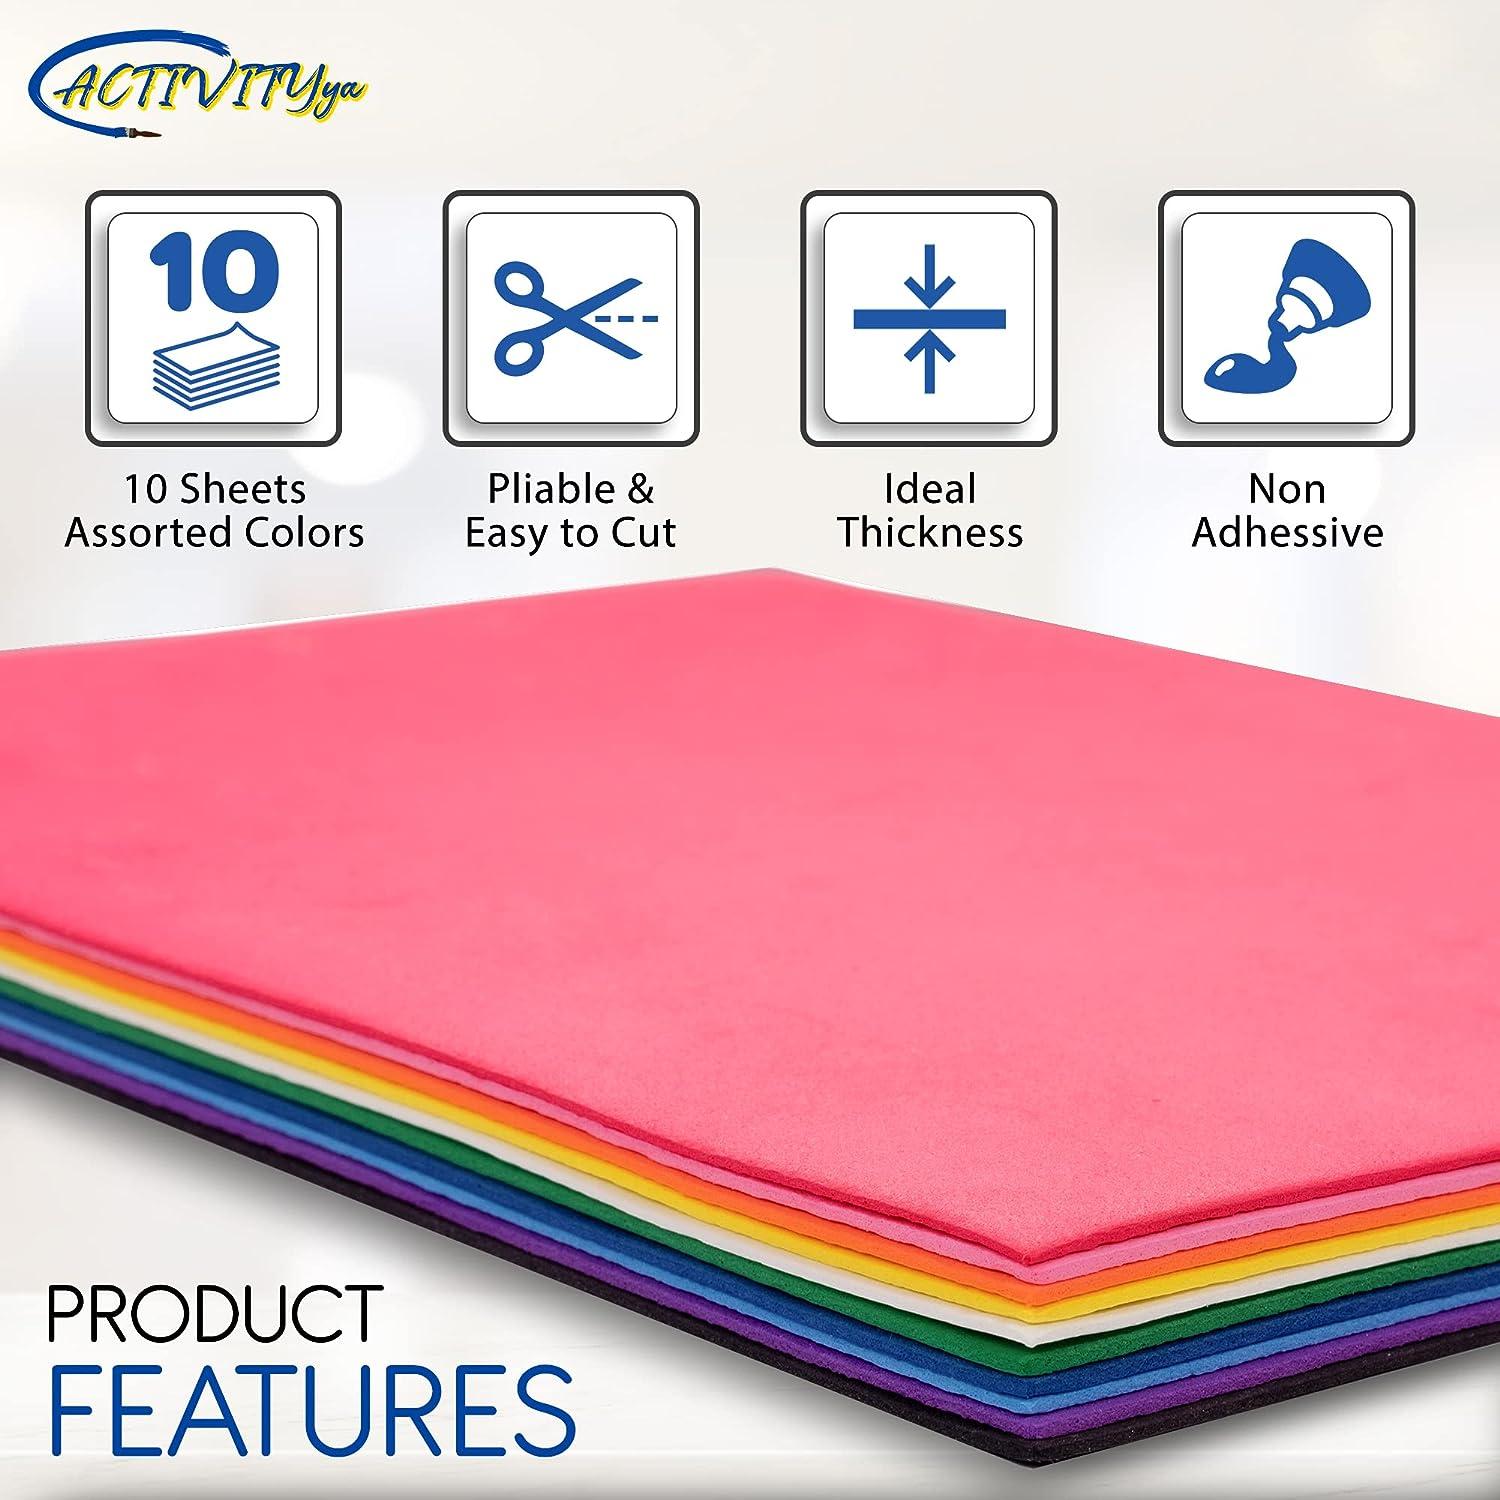 EVA Foam Sheets 9 x 12 Inch 10 Colors 2mm Thick Handicraft Foam Paper for  Arts and Crafts by ACTIVITYya - 10 Sheets ASSORTED